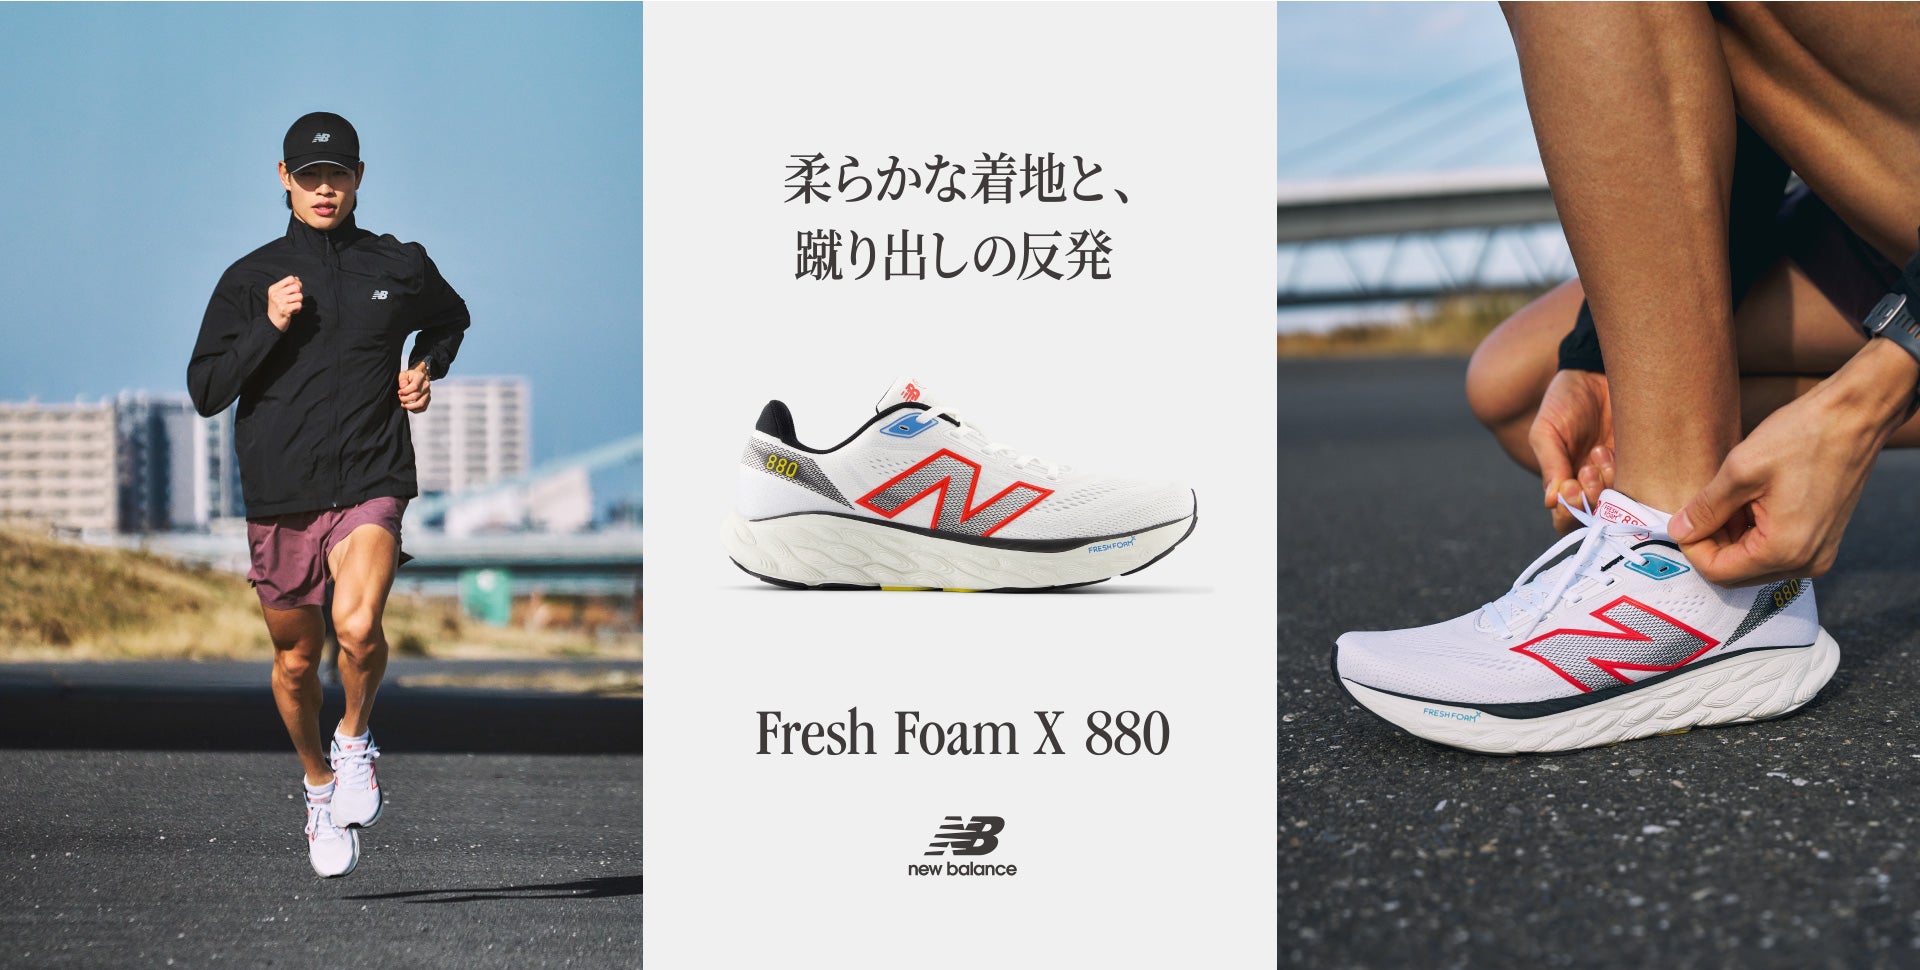 "Fresh Foam X 880" for a soft landing and strong kick-off response